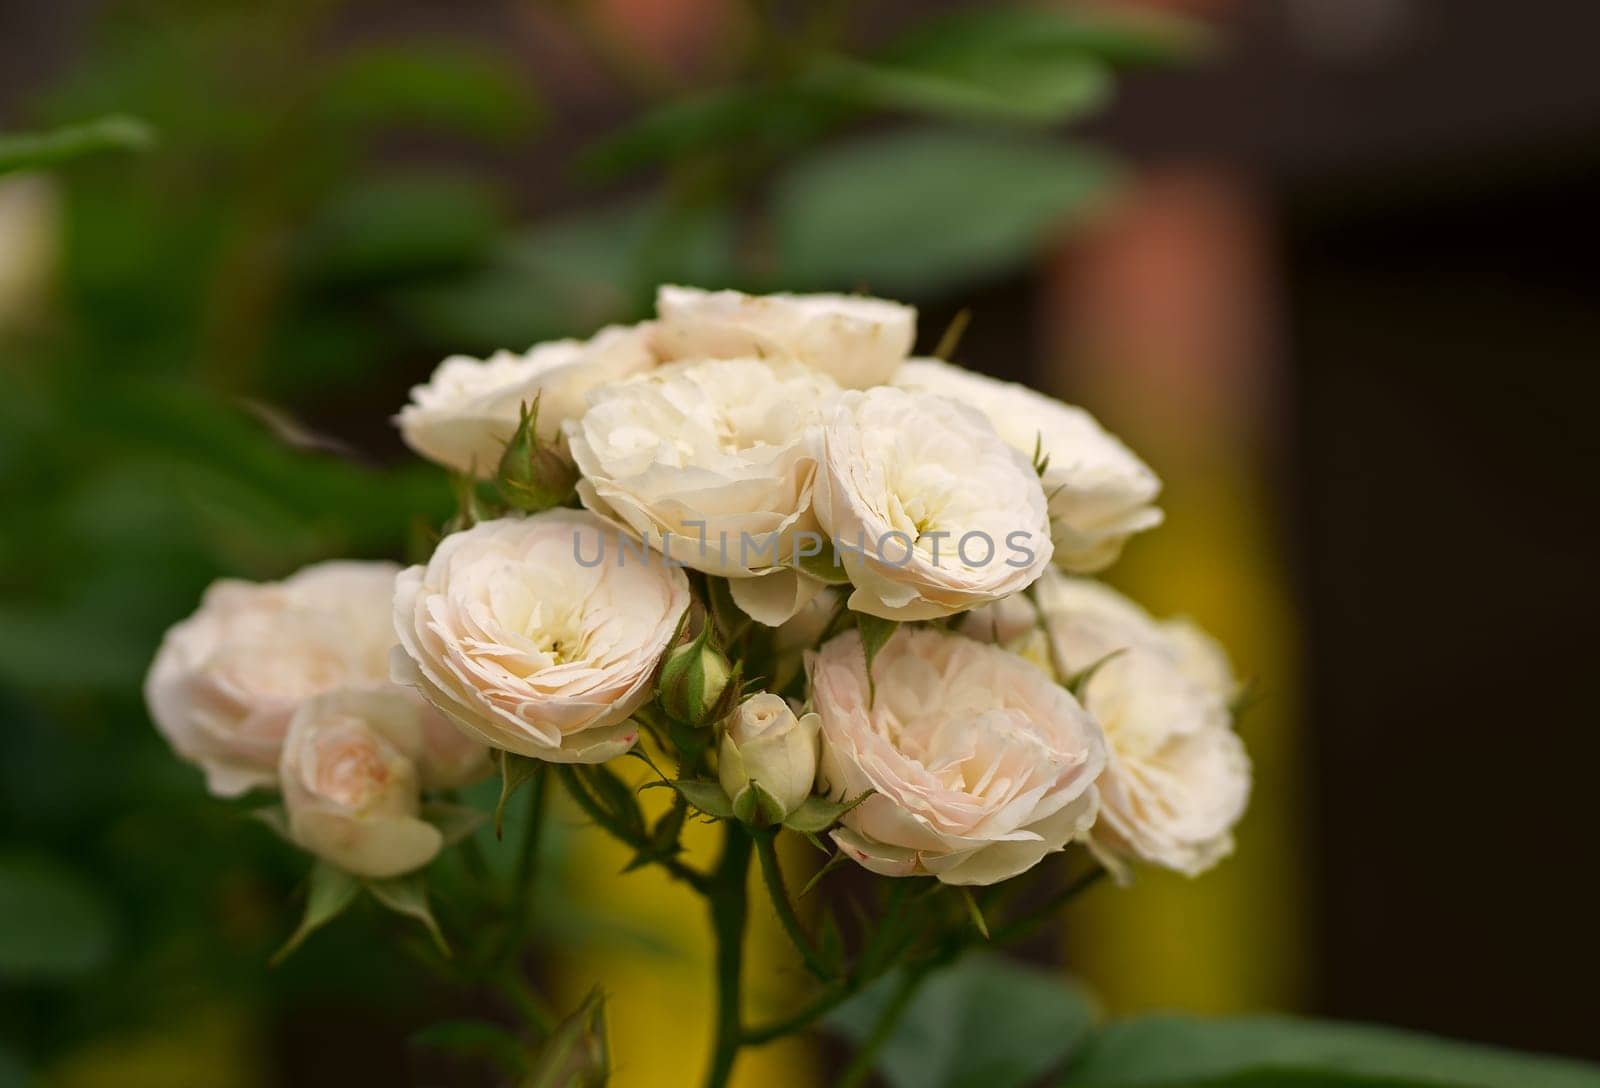 Blooming white roses bush in morning garden. Fresh white flowers blossom in green leaves. natural white roses buds swaying in spring wind in sun light. beautiful fragrant backdrop by aprilphoto